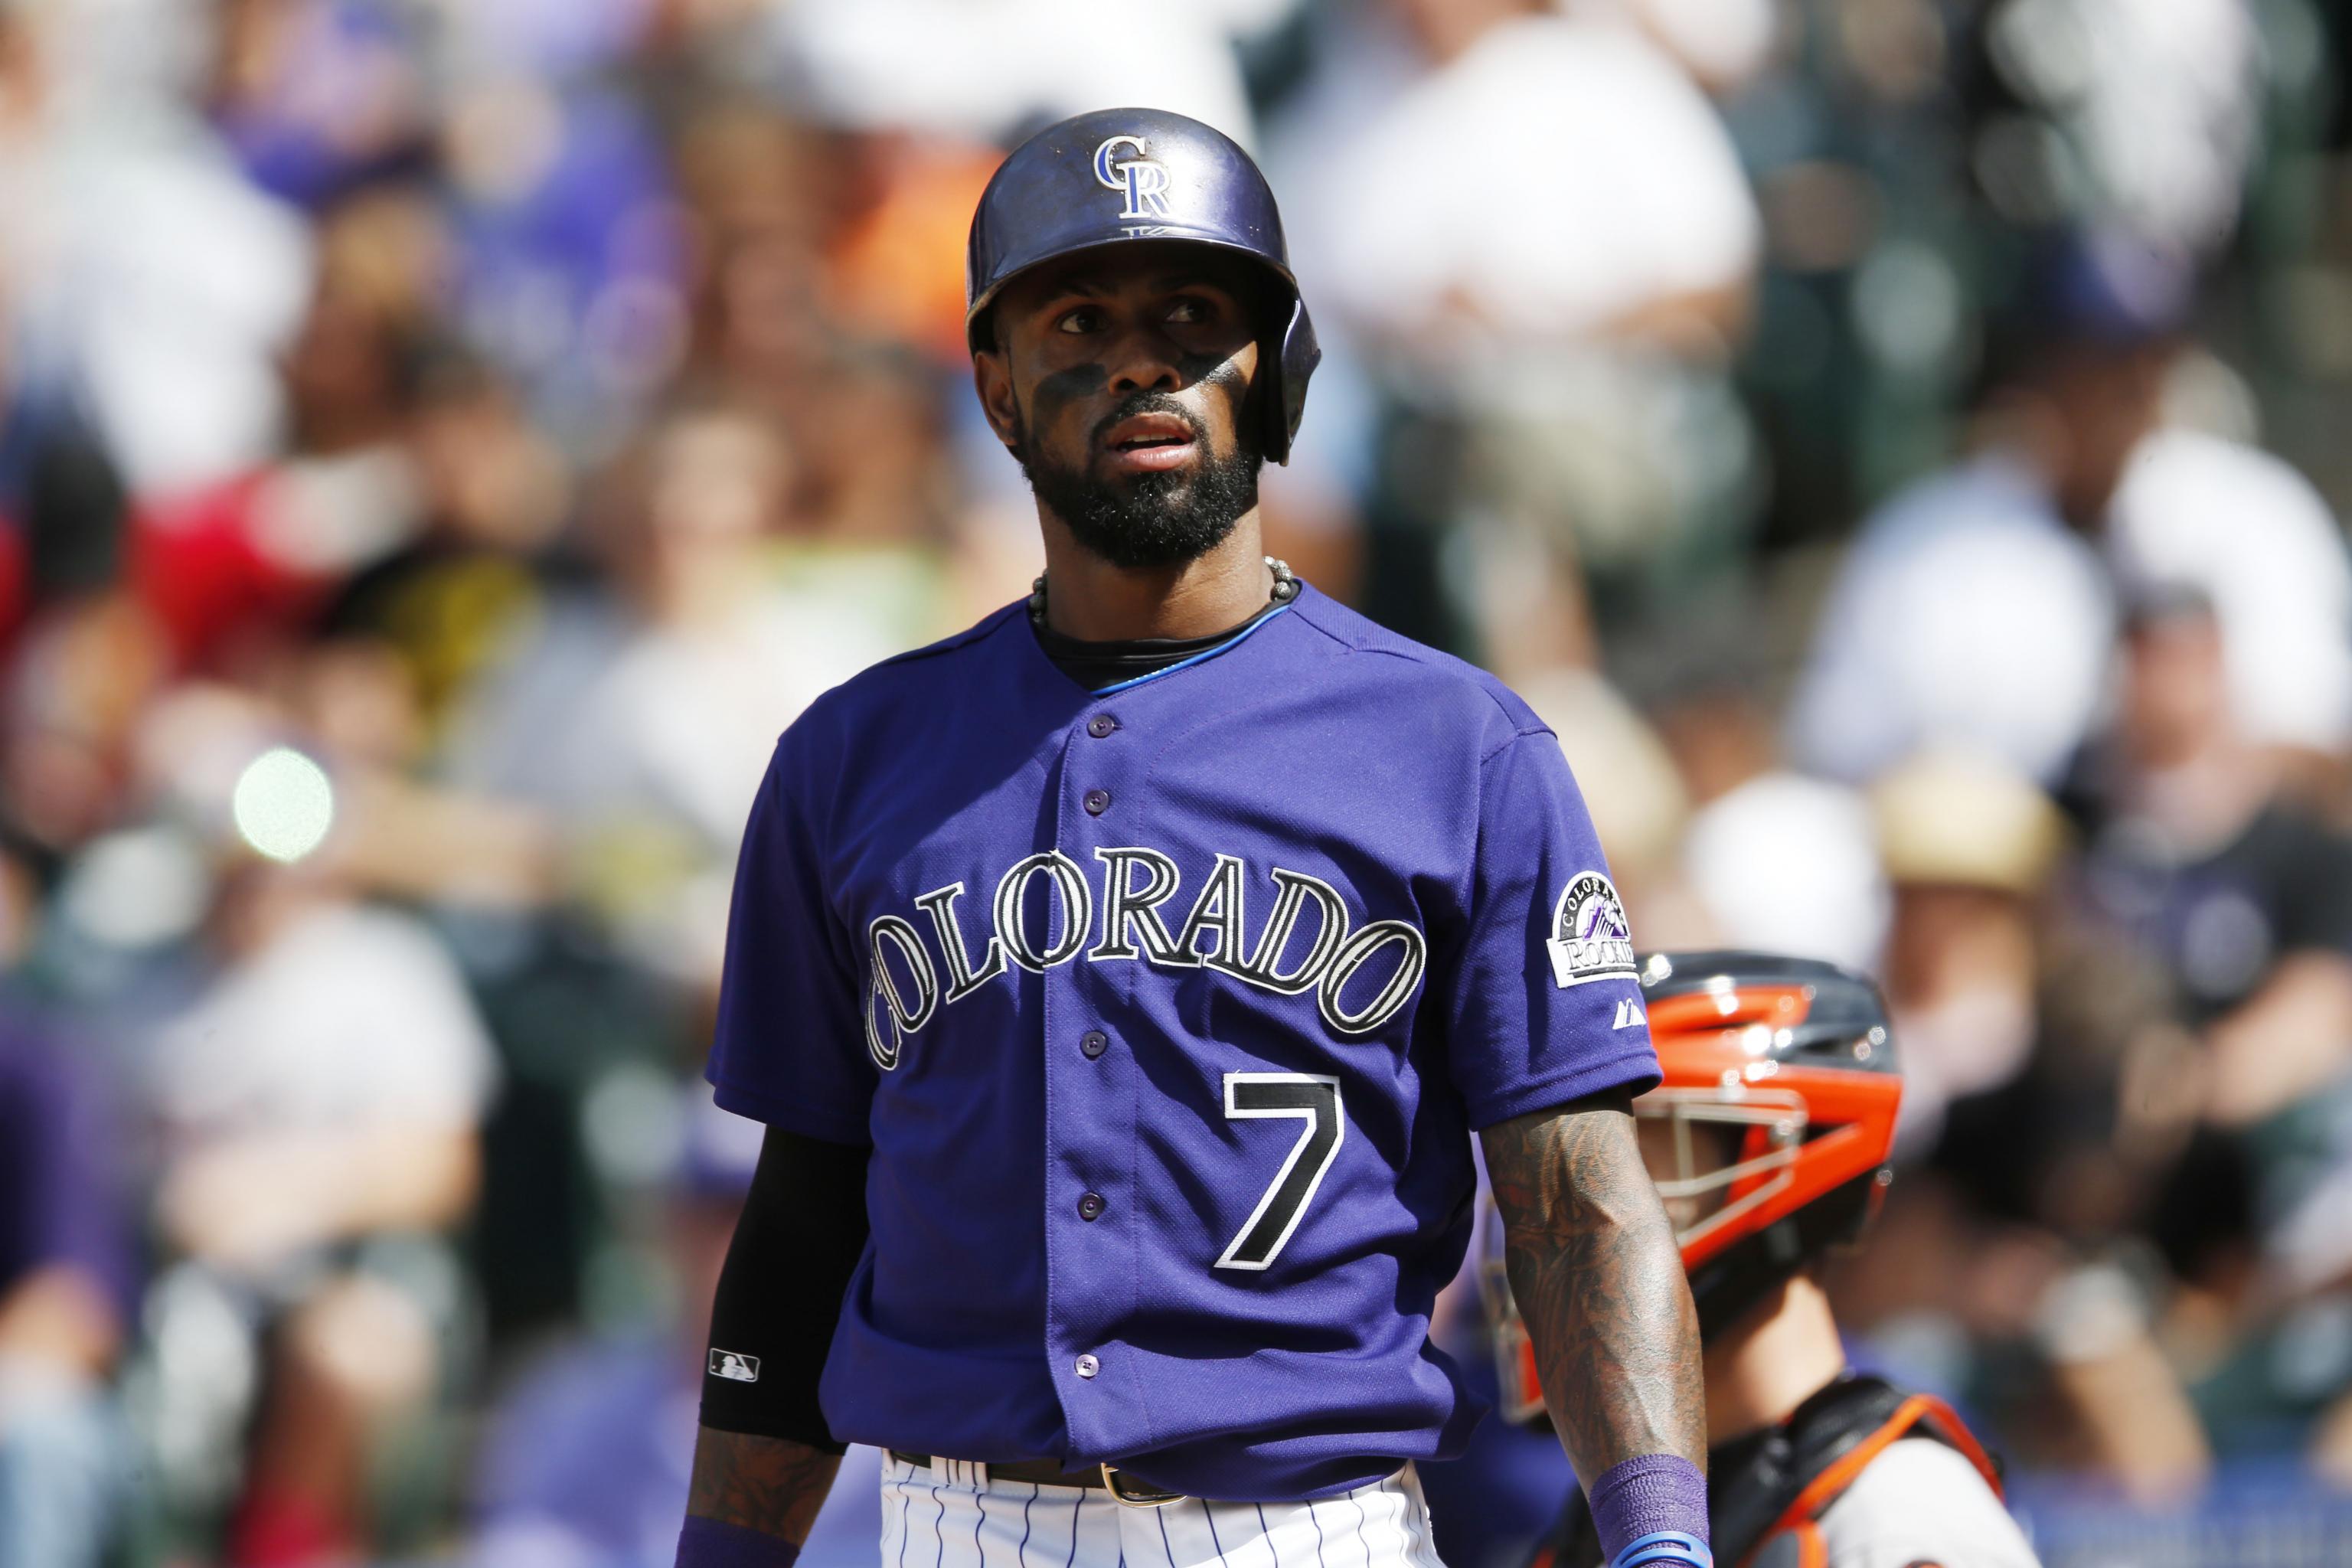 Mets Jose Reyes' Mistress Decides To Expose His Teammates Affairs